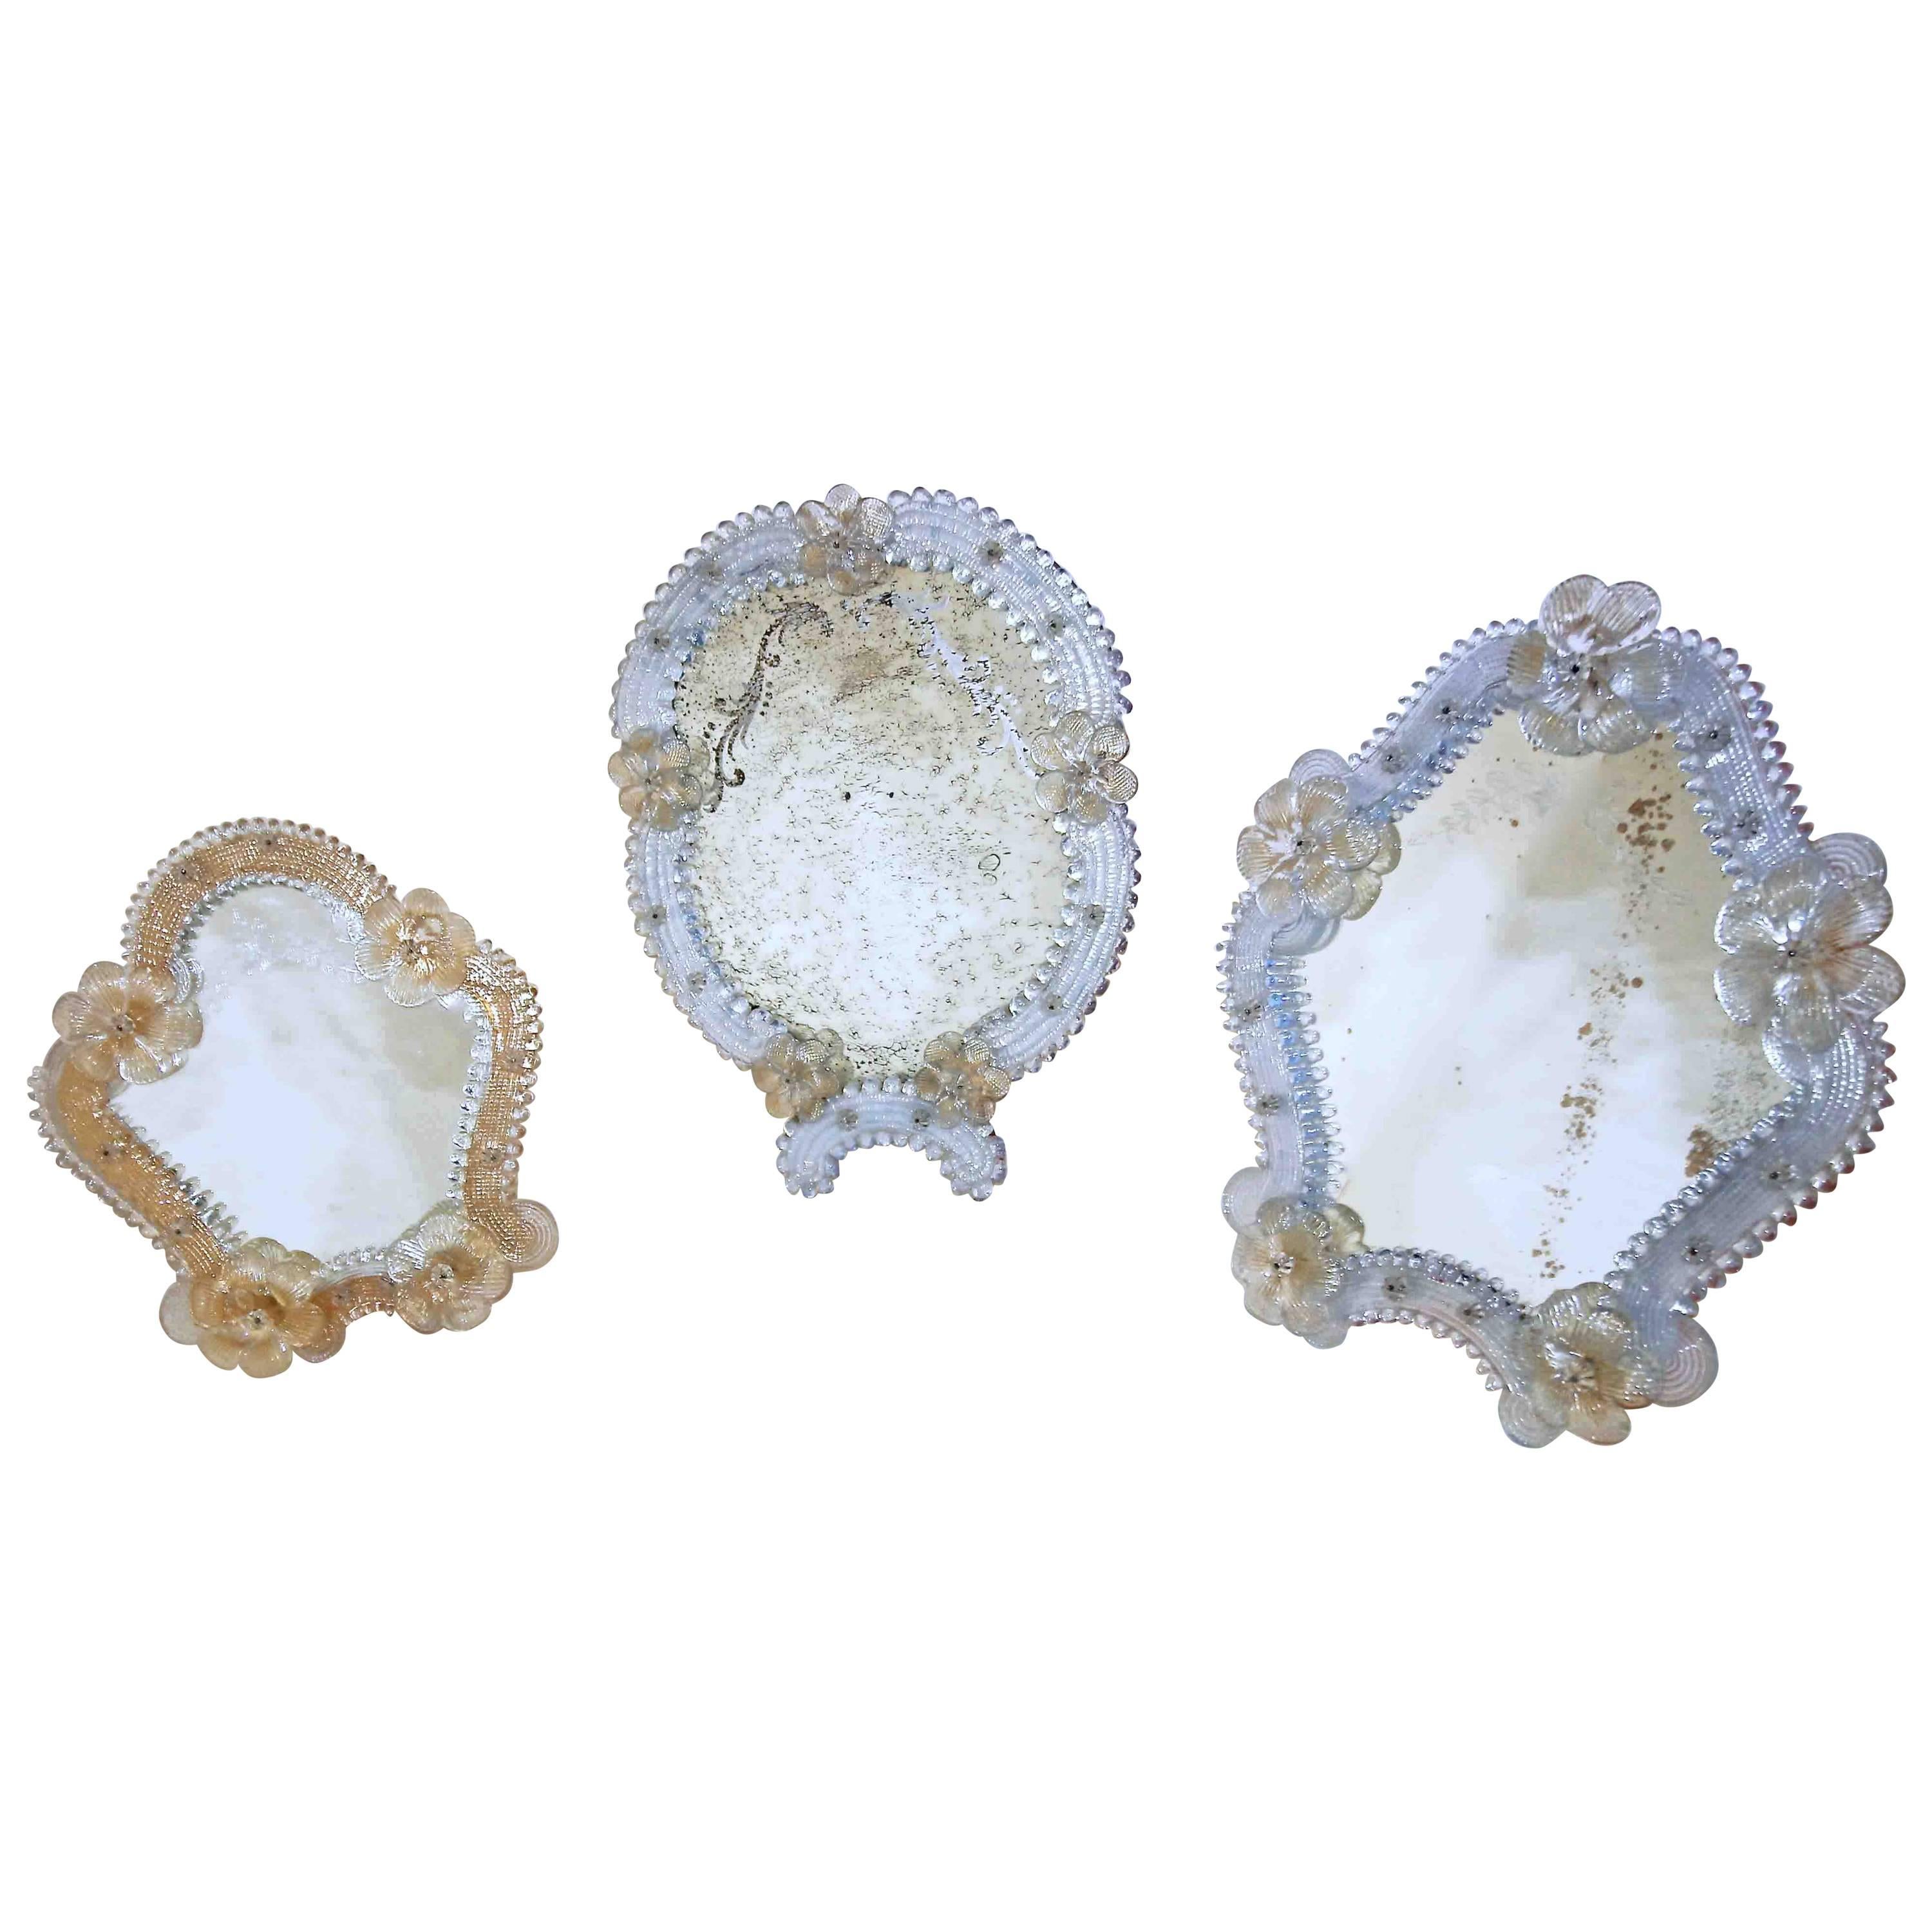 Set of Three Floral Venetian Glass Murano Table Mirrors